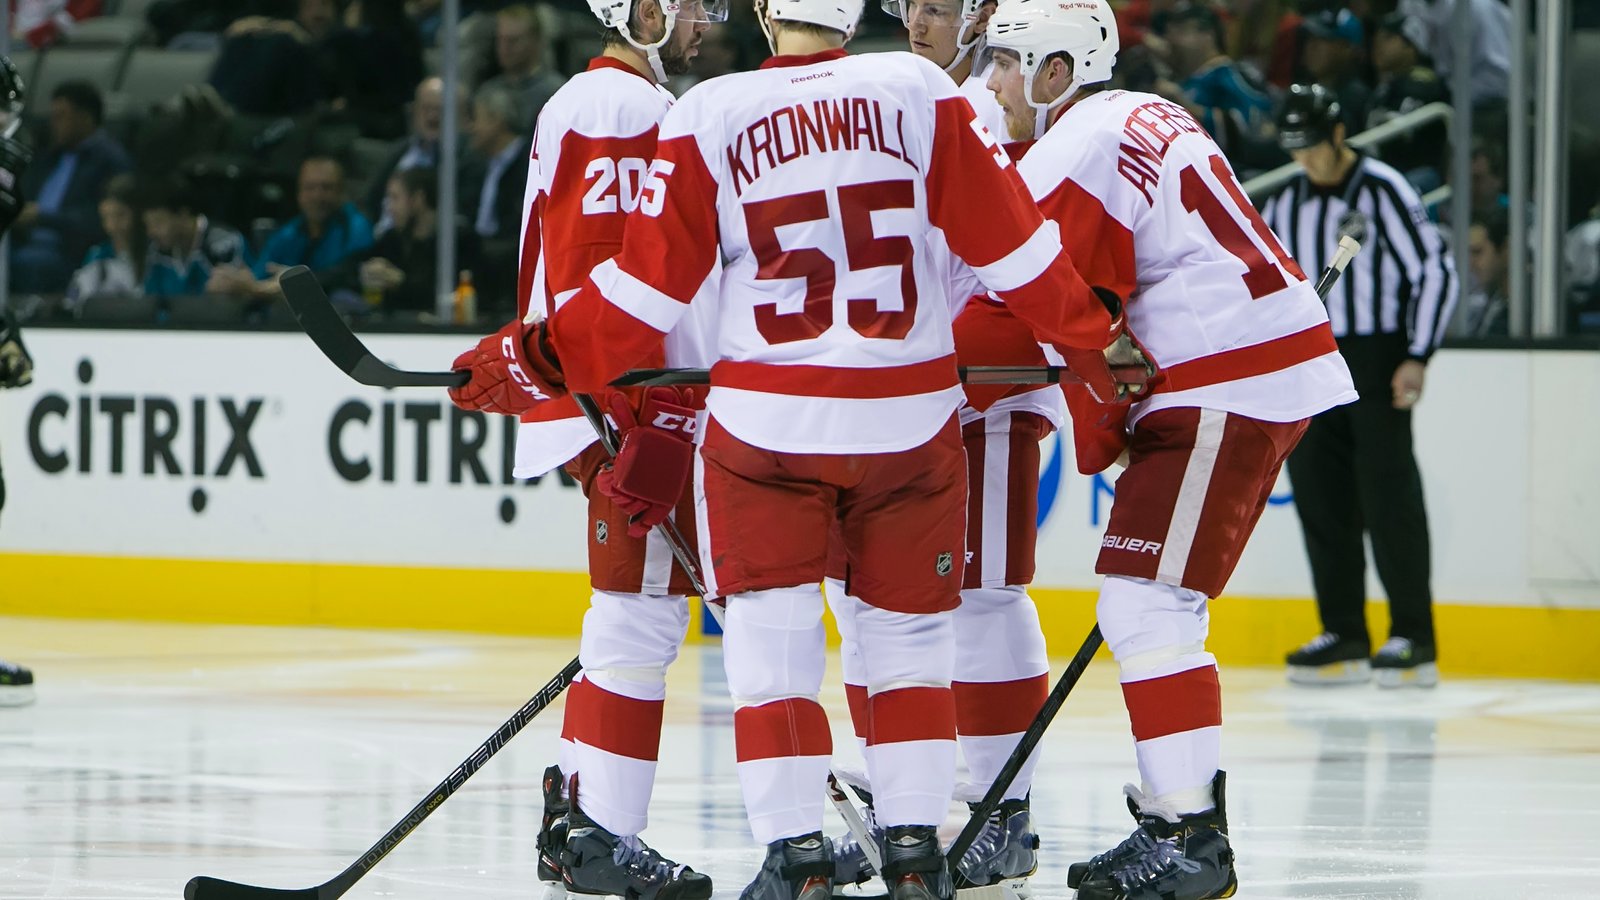 Breaking: Former Red Wing may be forced to retire at age 28